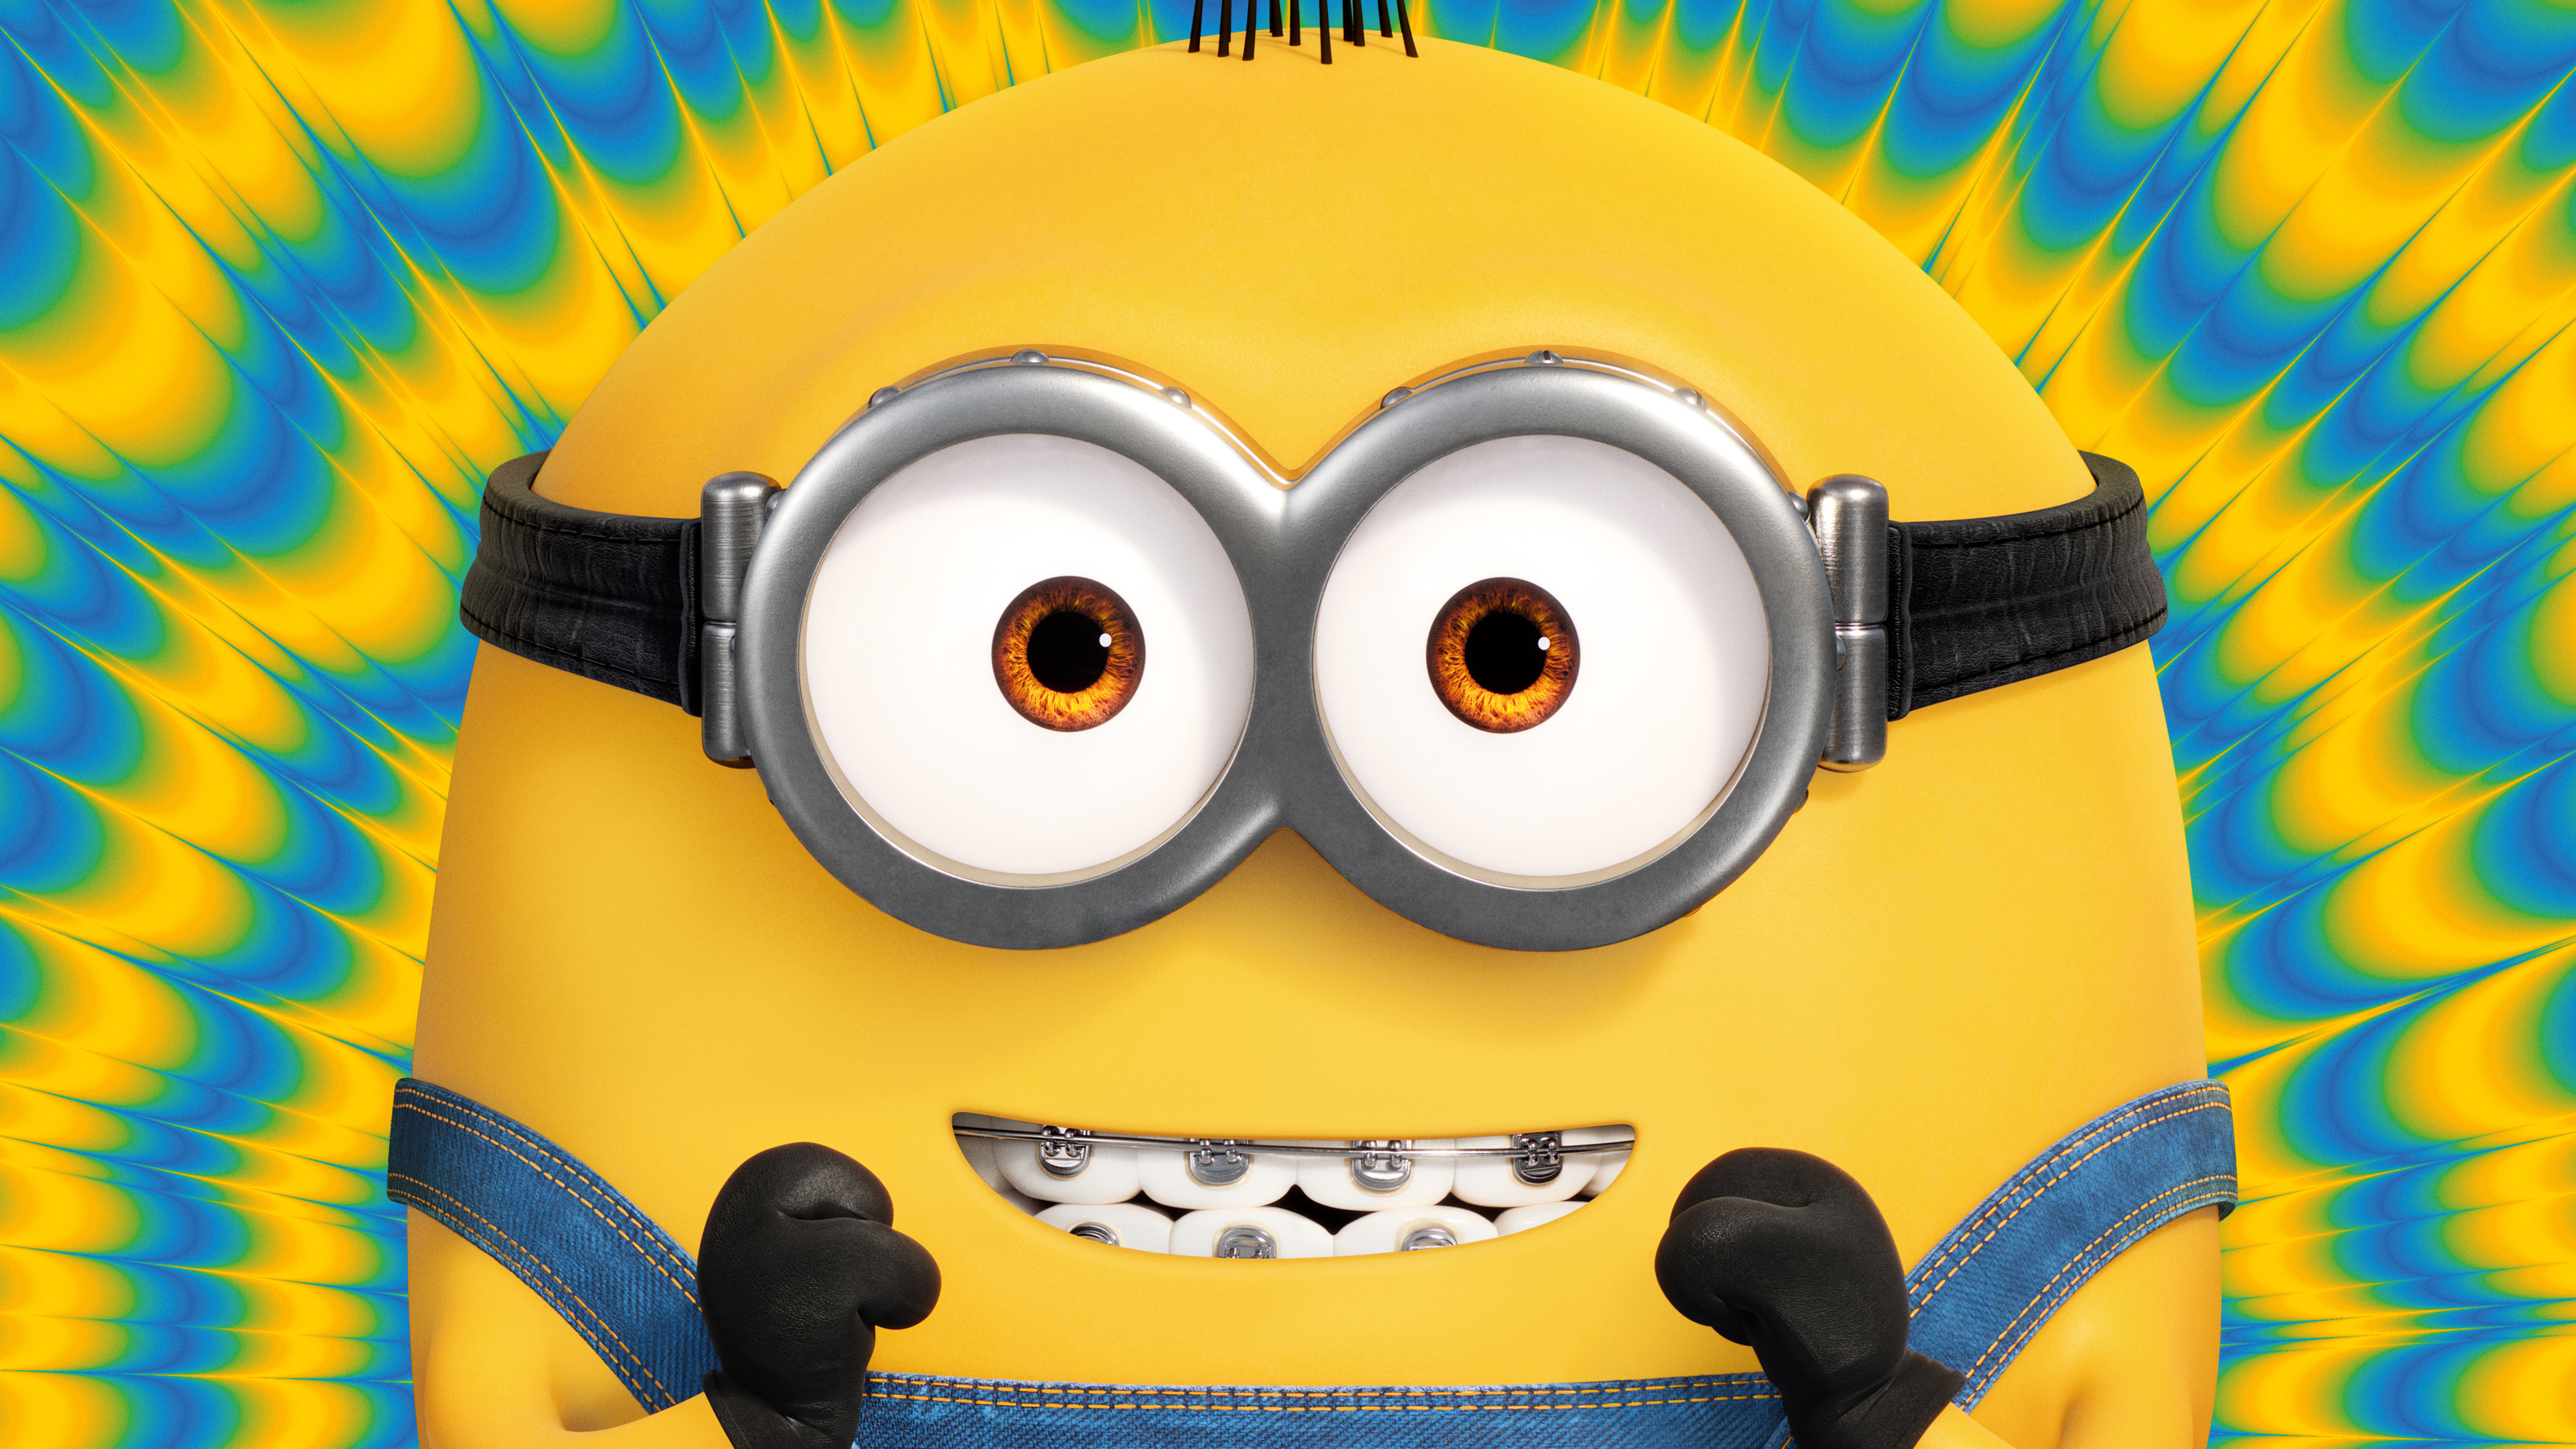 10 Minions The Rise of Gru HD Wallpapers and Backgrounds